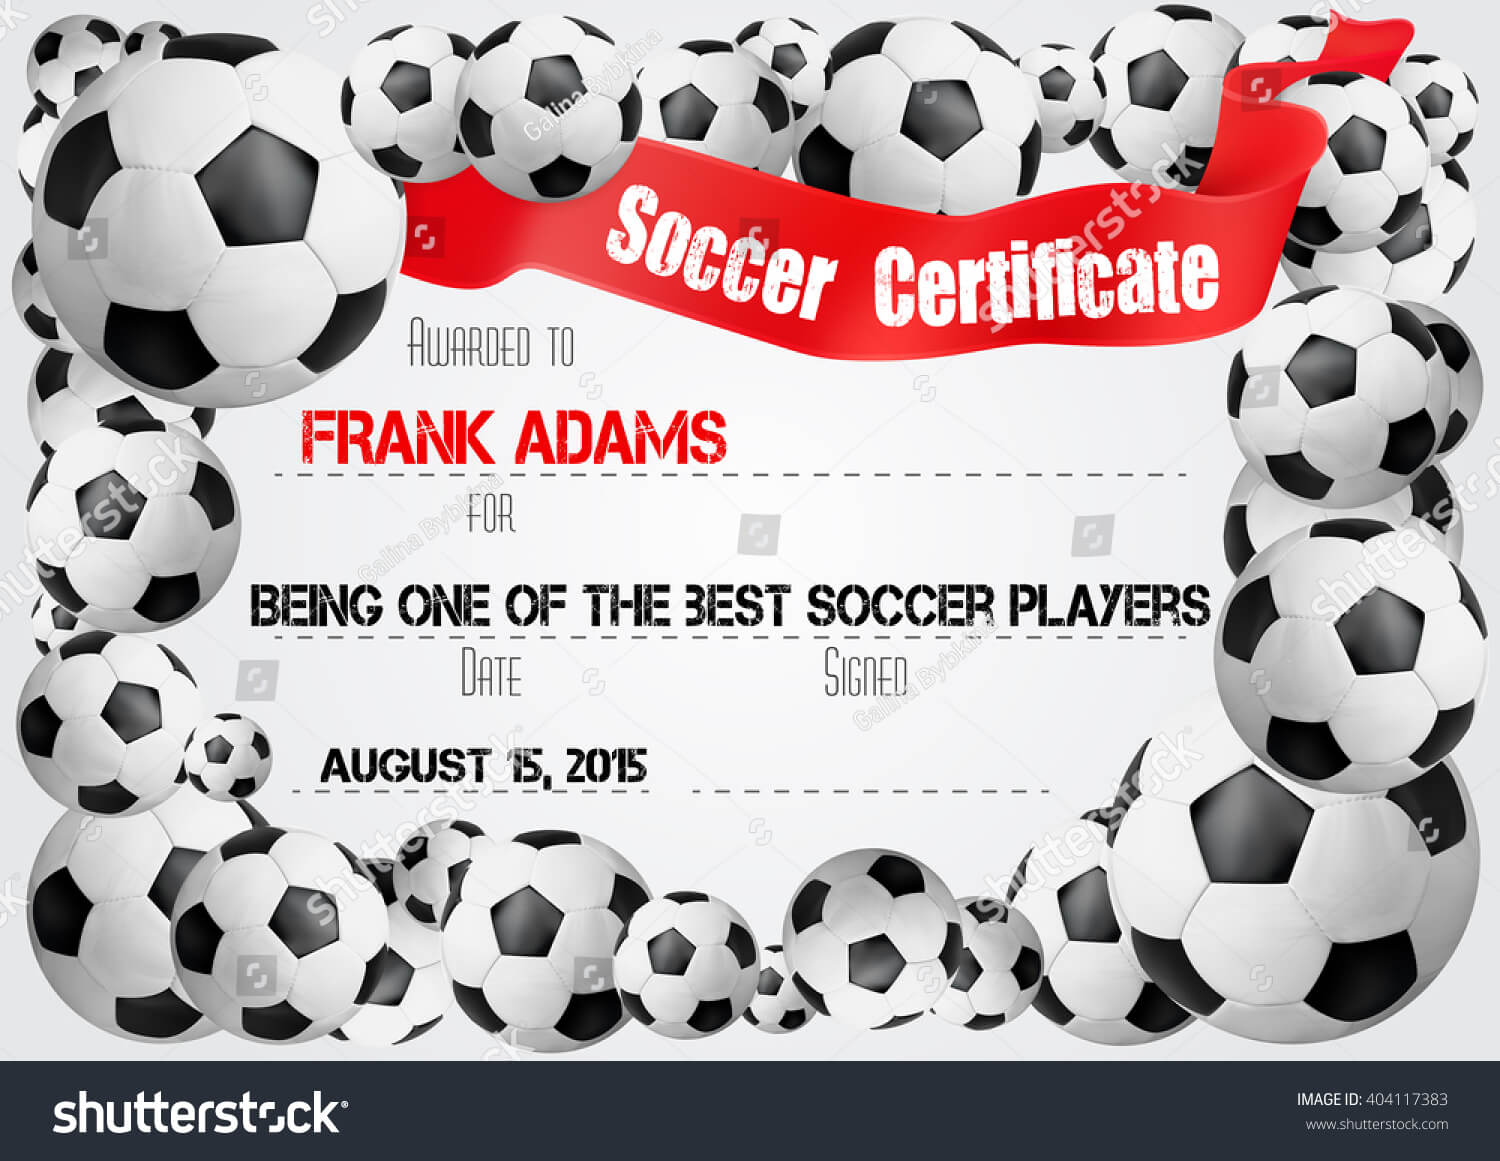 Royalty Free Soccer Certificate Stock Images, Photos Throughout Soccer Certificate Template Free